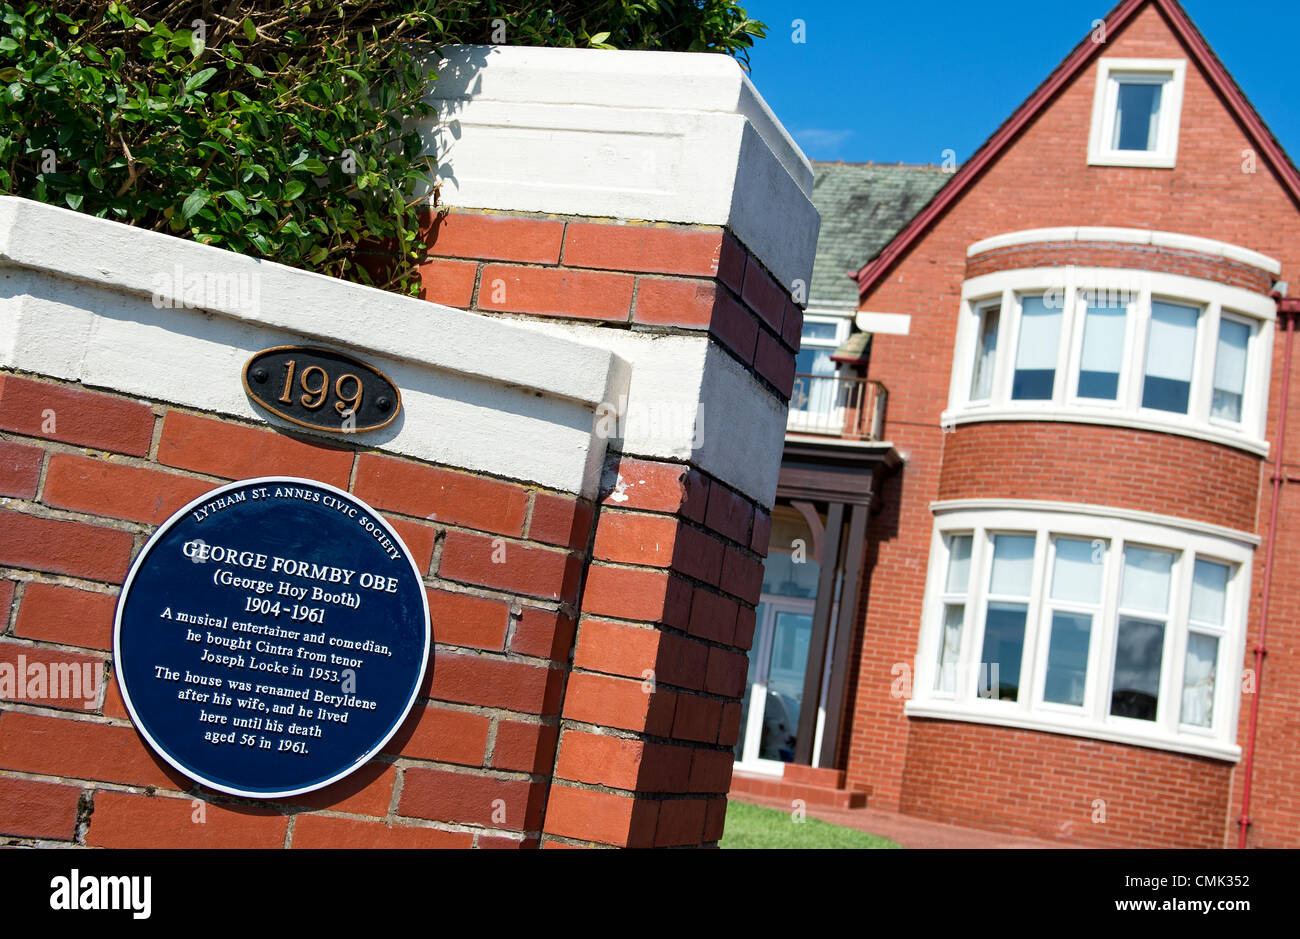 A blue plaque has been unveiled at entertainer George Formby's former home in Lytham St Annes, Lancashire. George Formby lived at the house, named Beryldene after his wife, for nearly ten years until his death in 1961.  Members of the George Formby Society performed at the unveiling on Inner Promenade in Fairhaven on 17th August 2012 Stock Photo